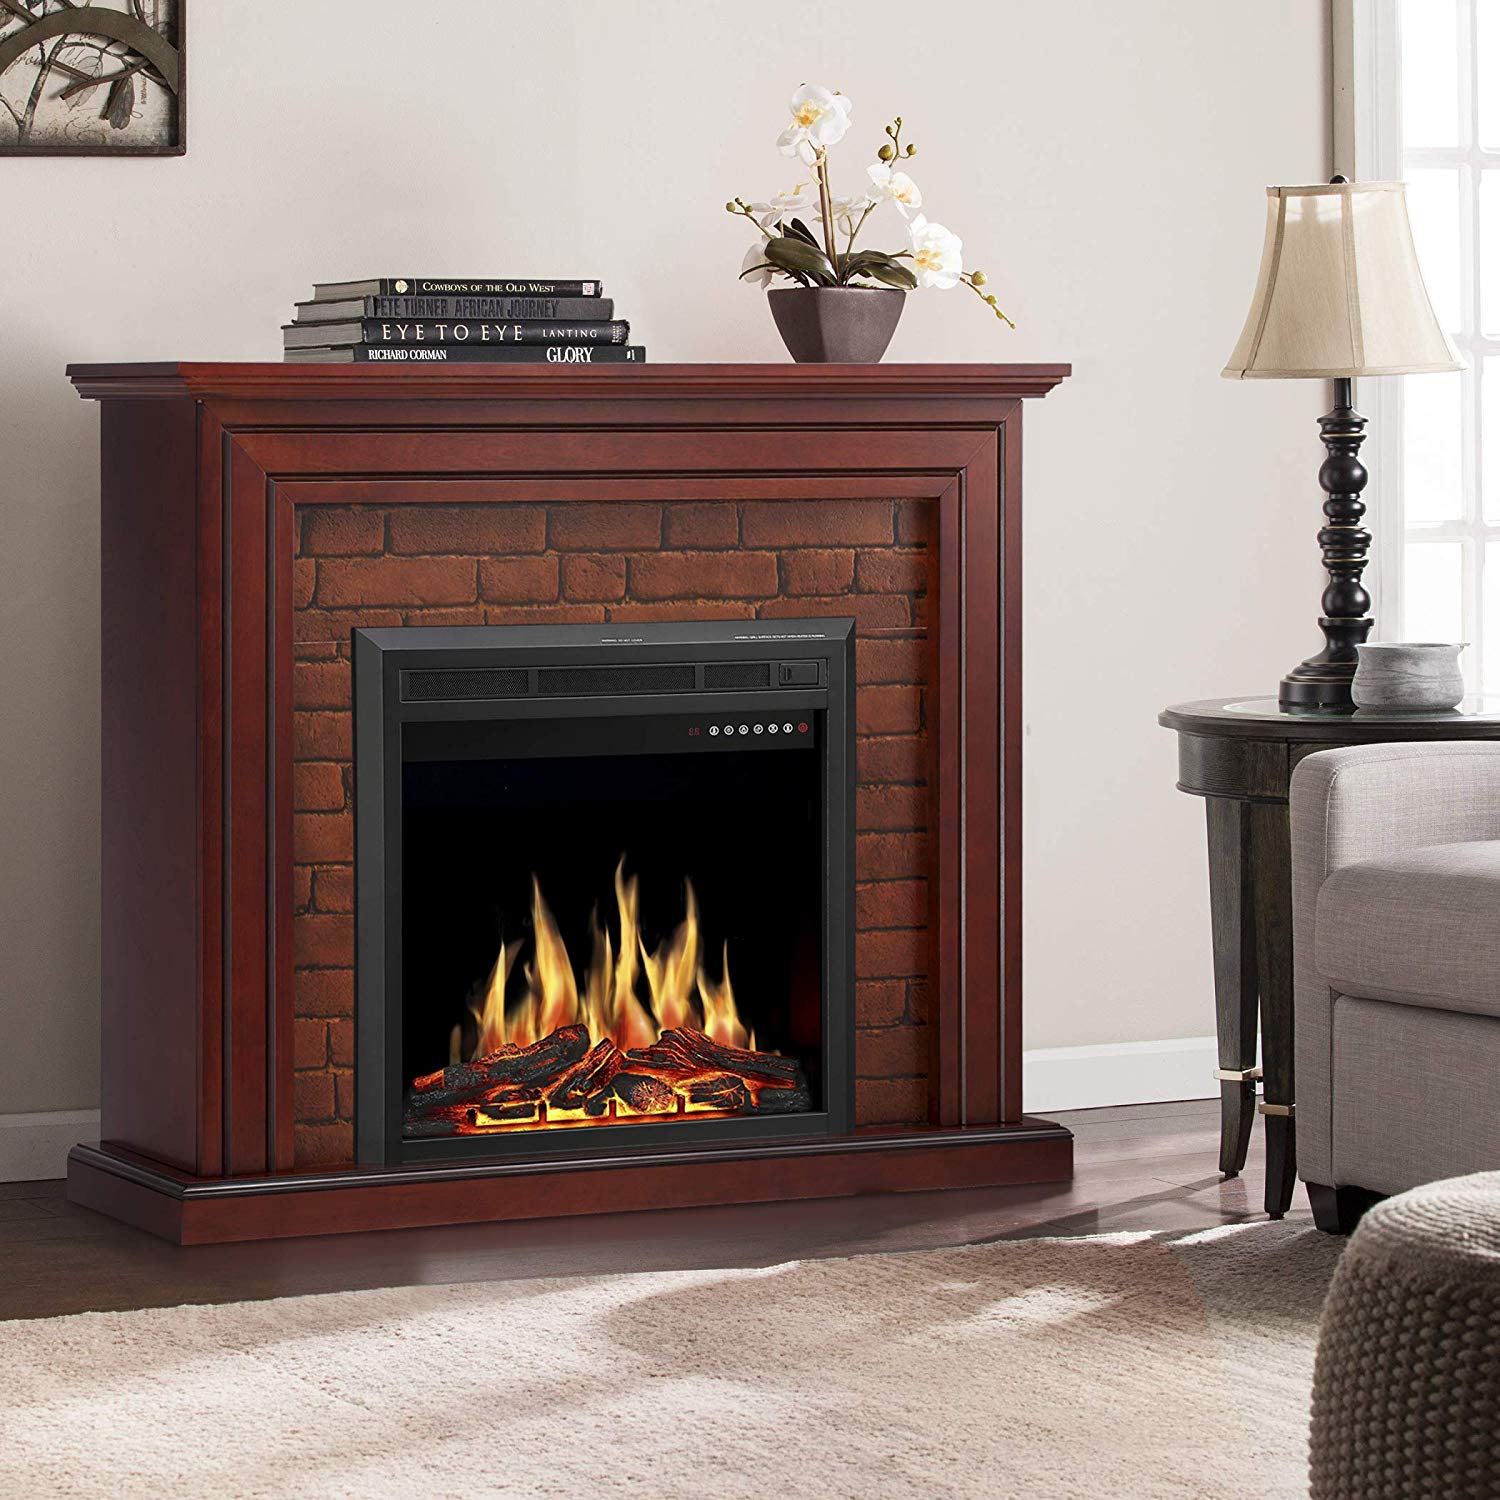 52 Inch High Electric Fireplace Beautiful Jamfly Electric Fireplace Mantel Package Traditional Brick Wall Design Heater with Remote Control and Led touch Screen Home Accent Furnishings